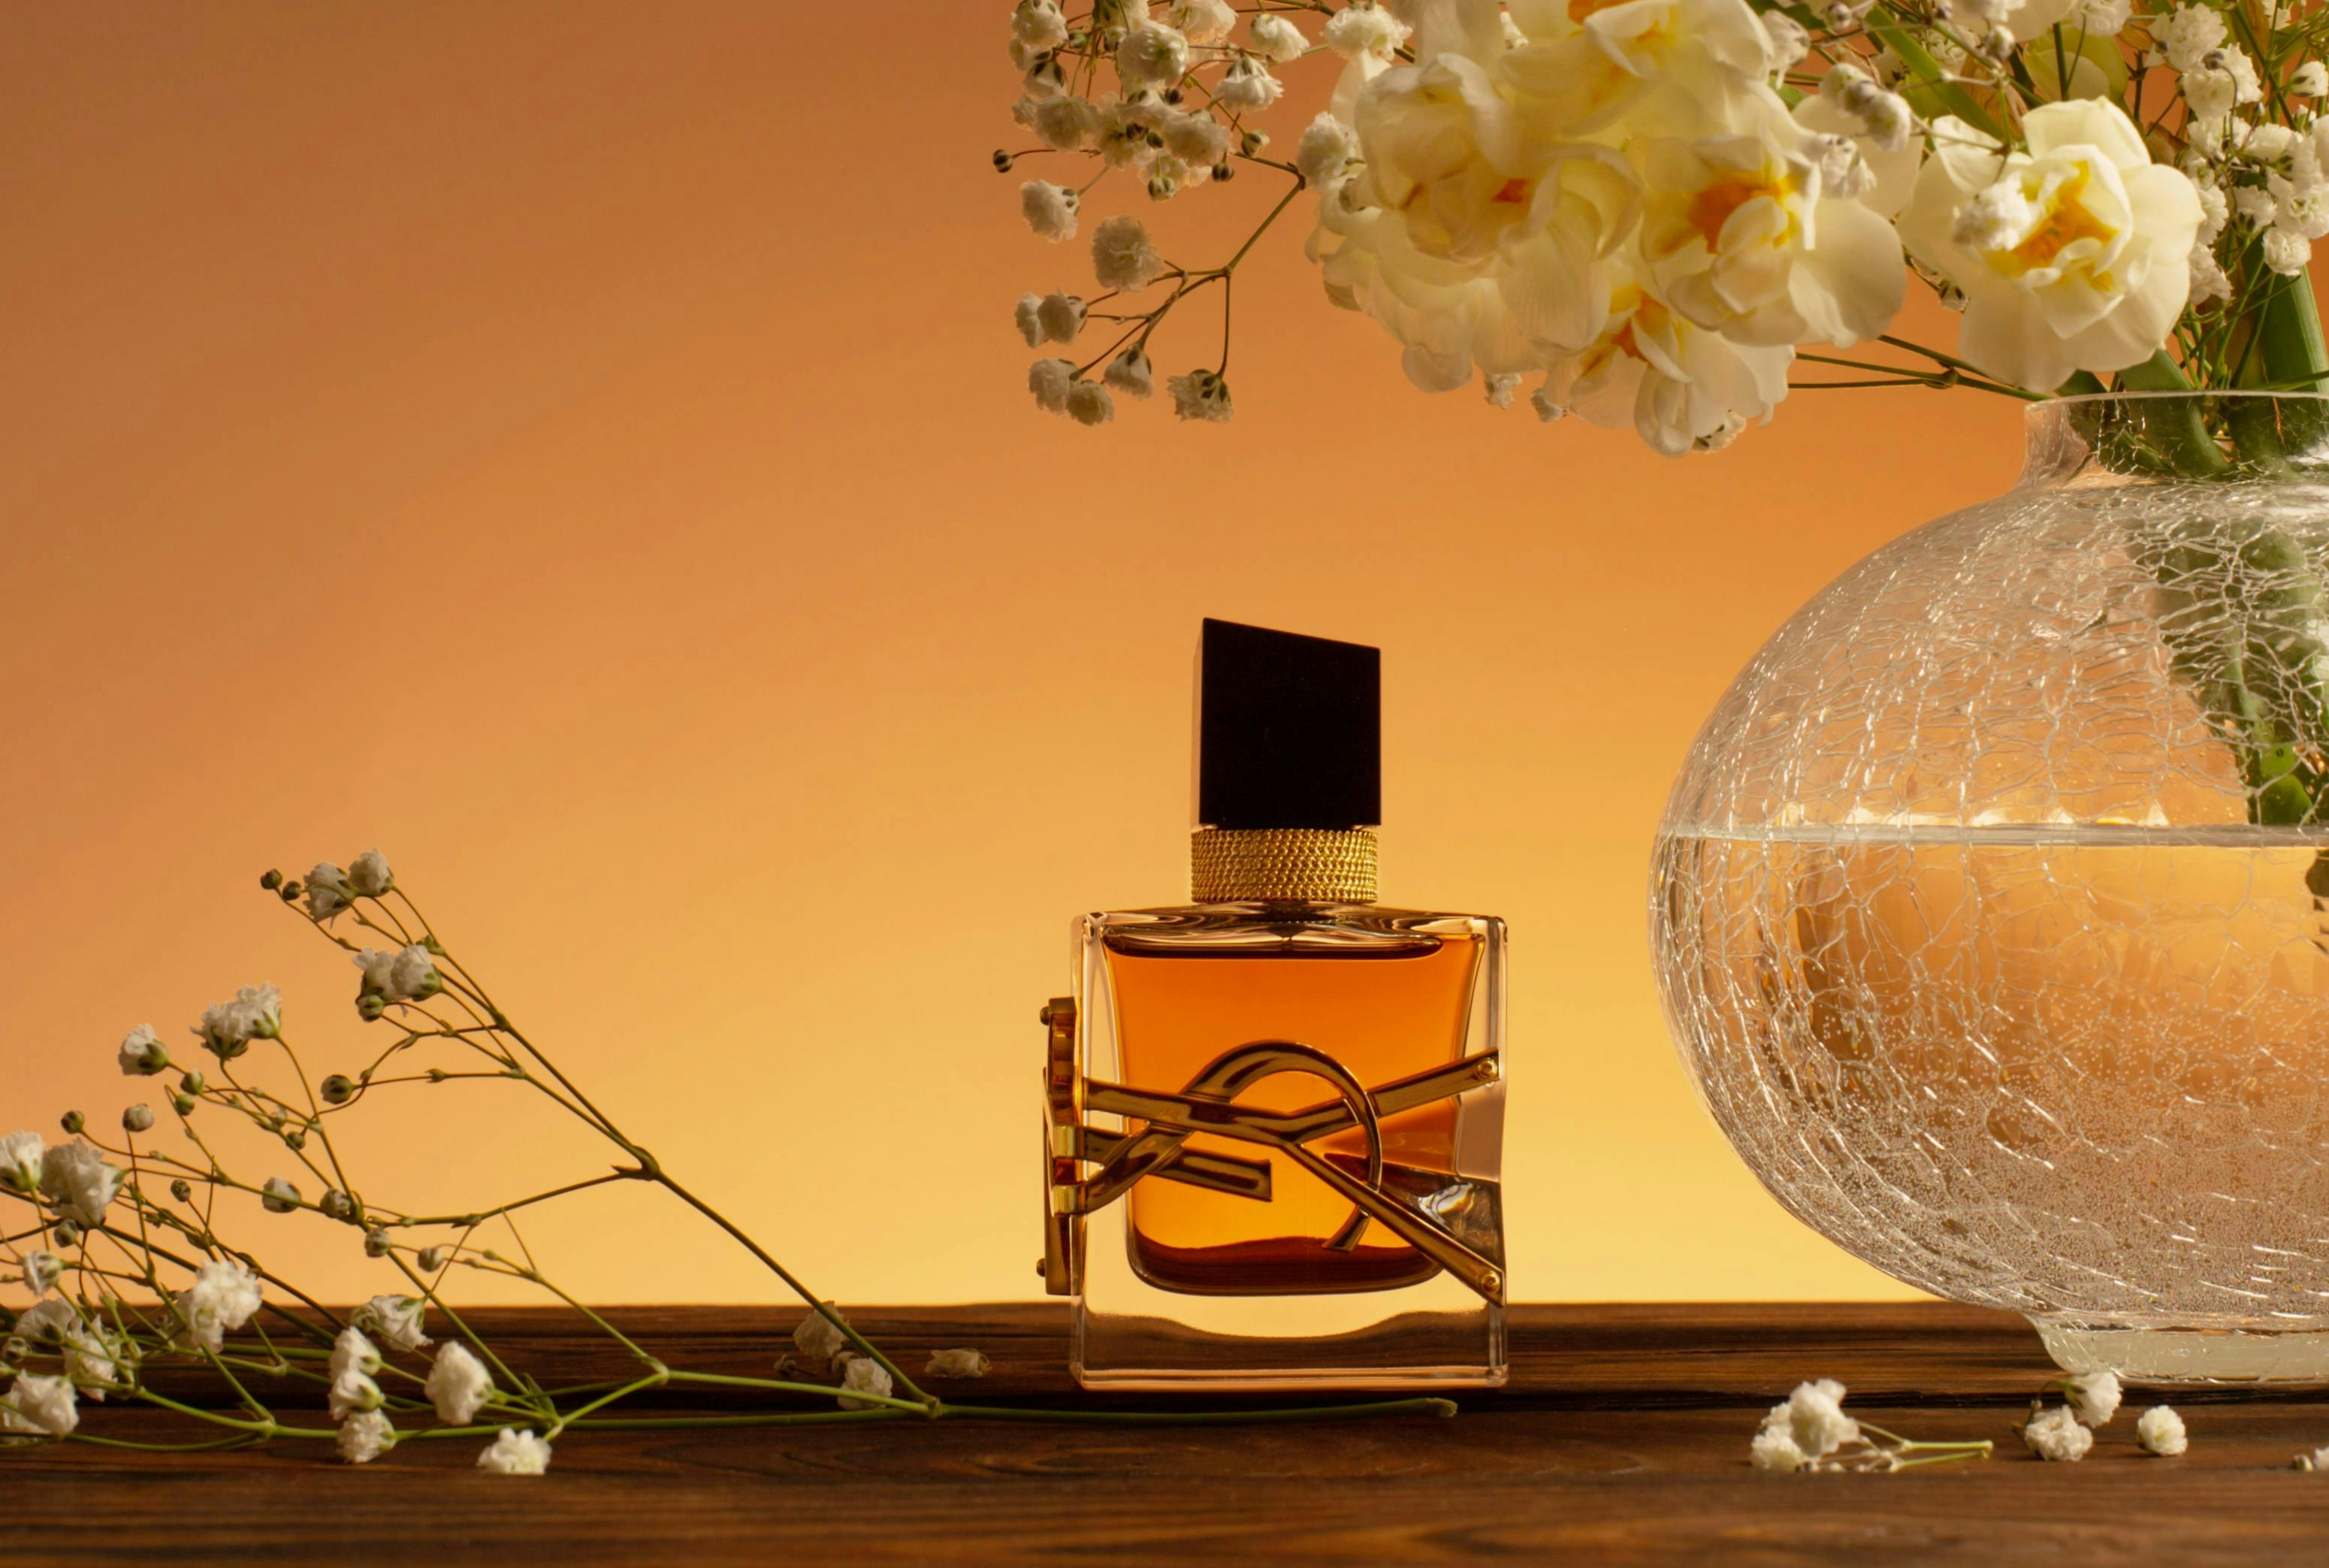 container,fragrant,beauty,illustrative editorial,vase,smell,spring,ysl perfume,ysl,parfum,golden,scent,logo,cosmetic,female,brand,intense,flowers,glass,spray,bouquet,glamour,edp,closeup,light,background,yellow,bottle,perfume,gold,gypsophila,yves saint laurent,design,libre,elegant,table,editorial,accord,designer,narcissus,fragrance,elegance,liquid,perfumery,perfume bottle,wooden,luxury,daffodils,aroma,fashion flower flower arrangement plant bottle cosmetics perfume petal ikebana